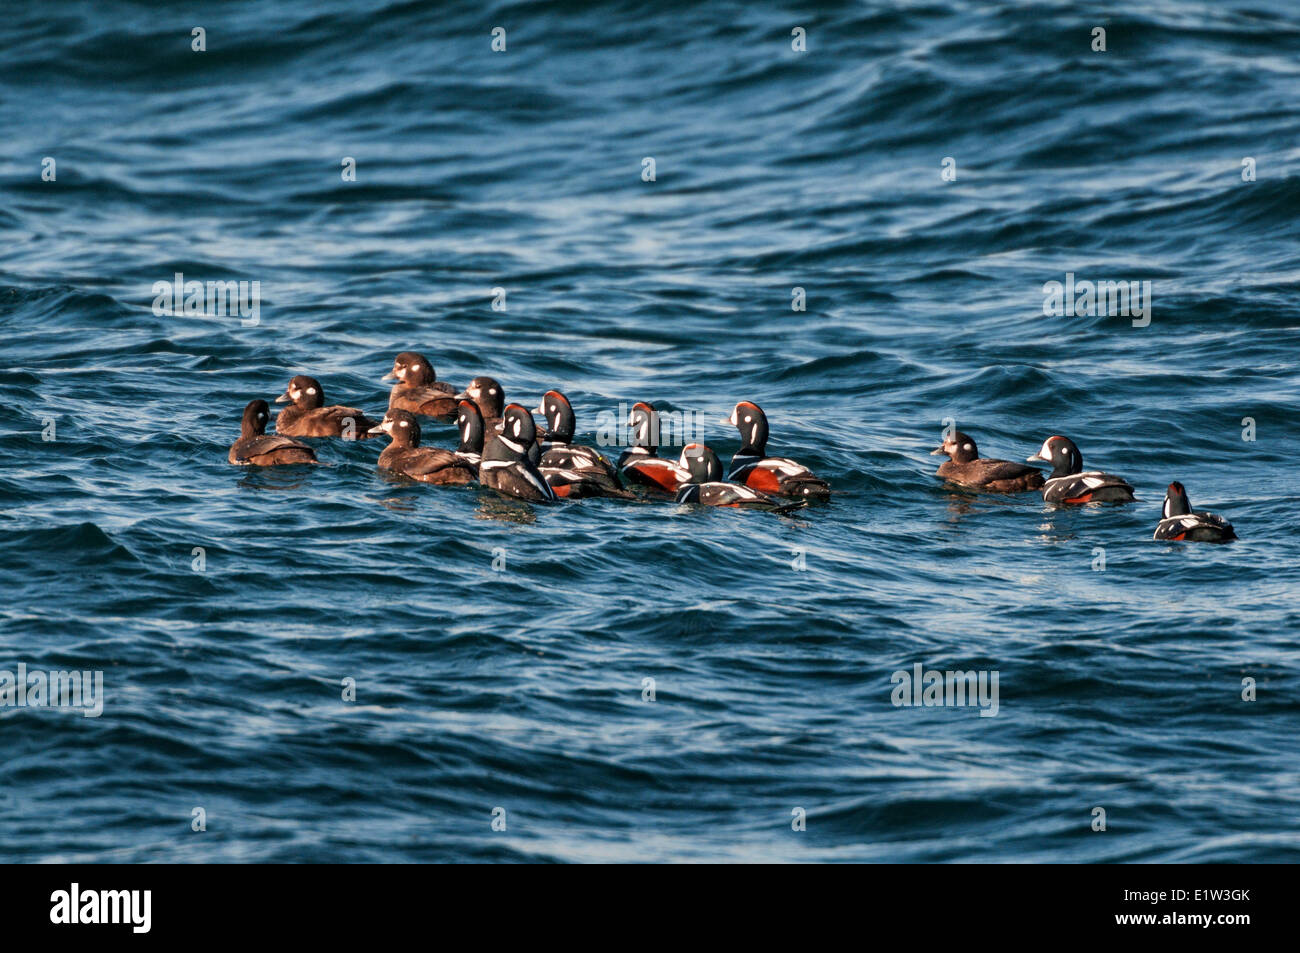 Harlequin Ducks (Histrionicus histrionicus) winter in small groups along coastal Nova Scotia, Bay of Fundy, late April, Canada. Stock Photo